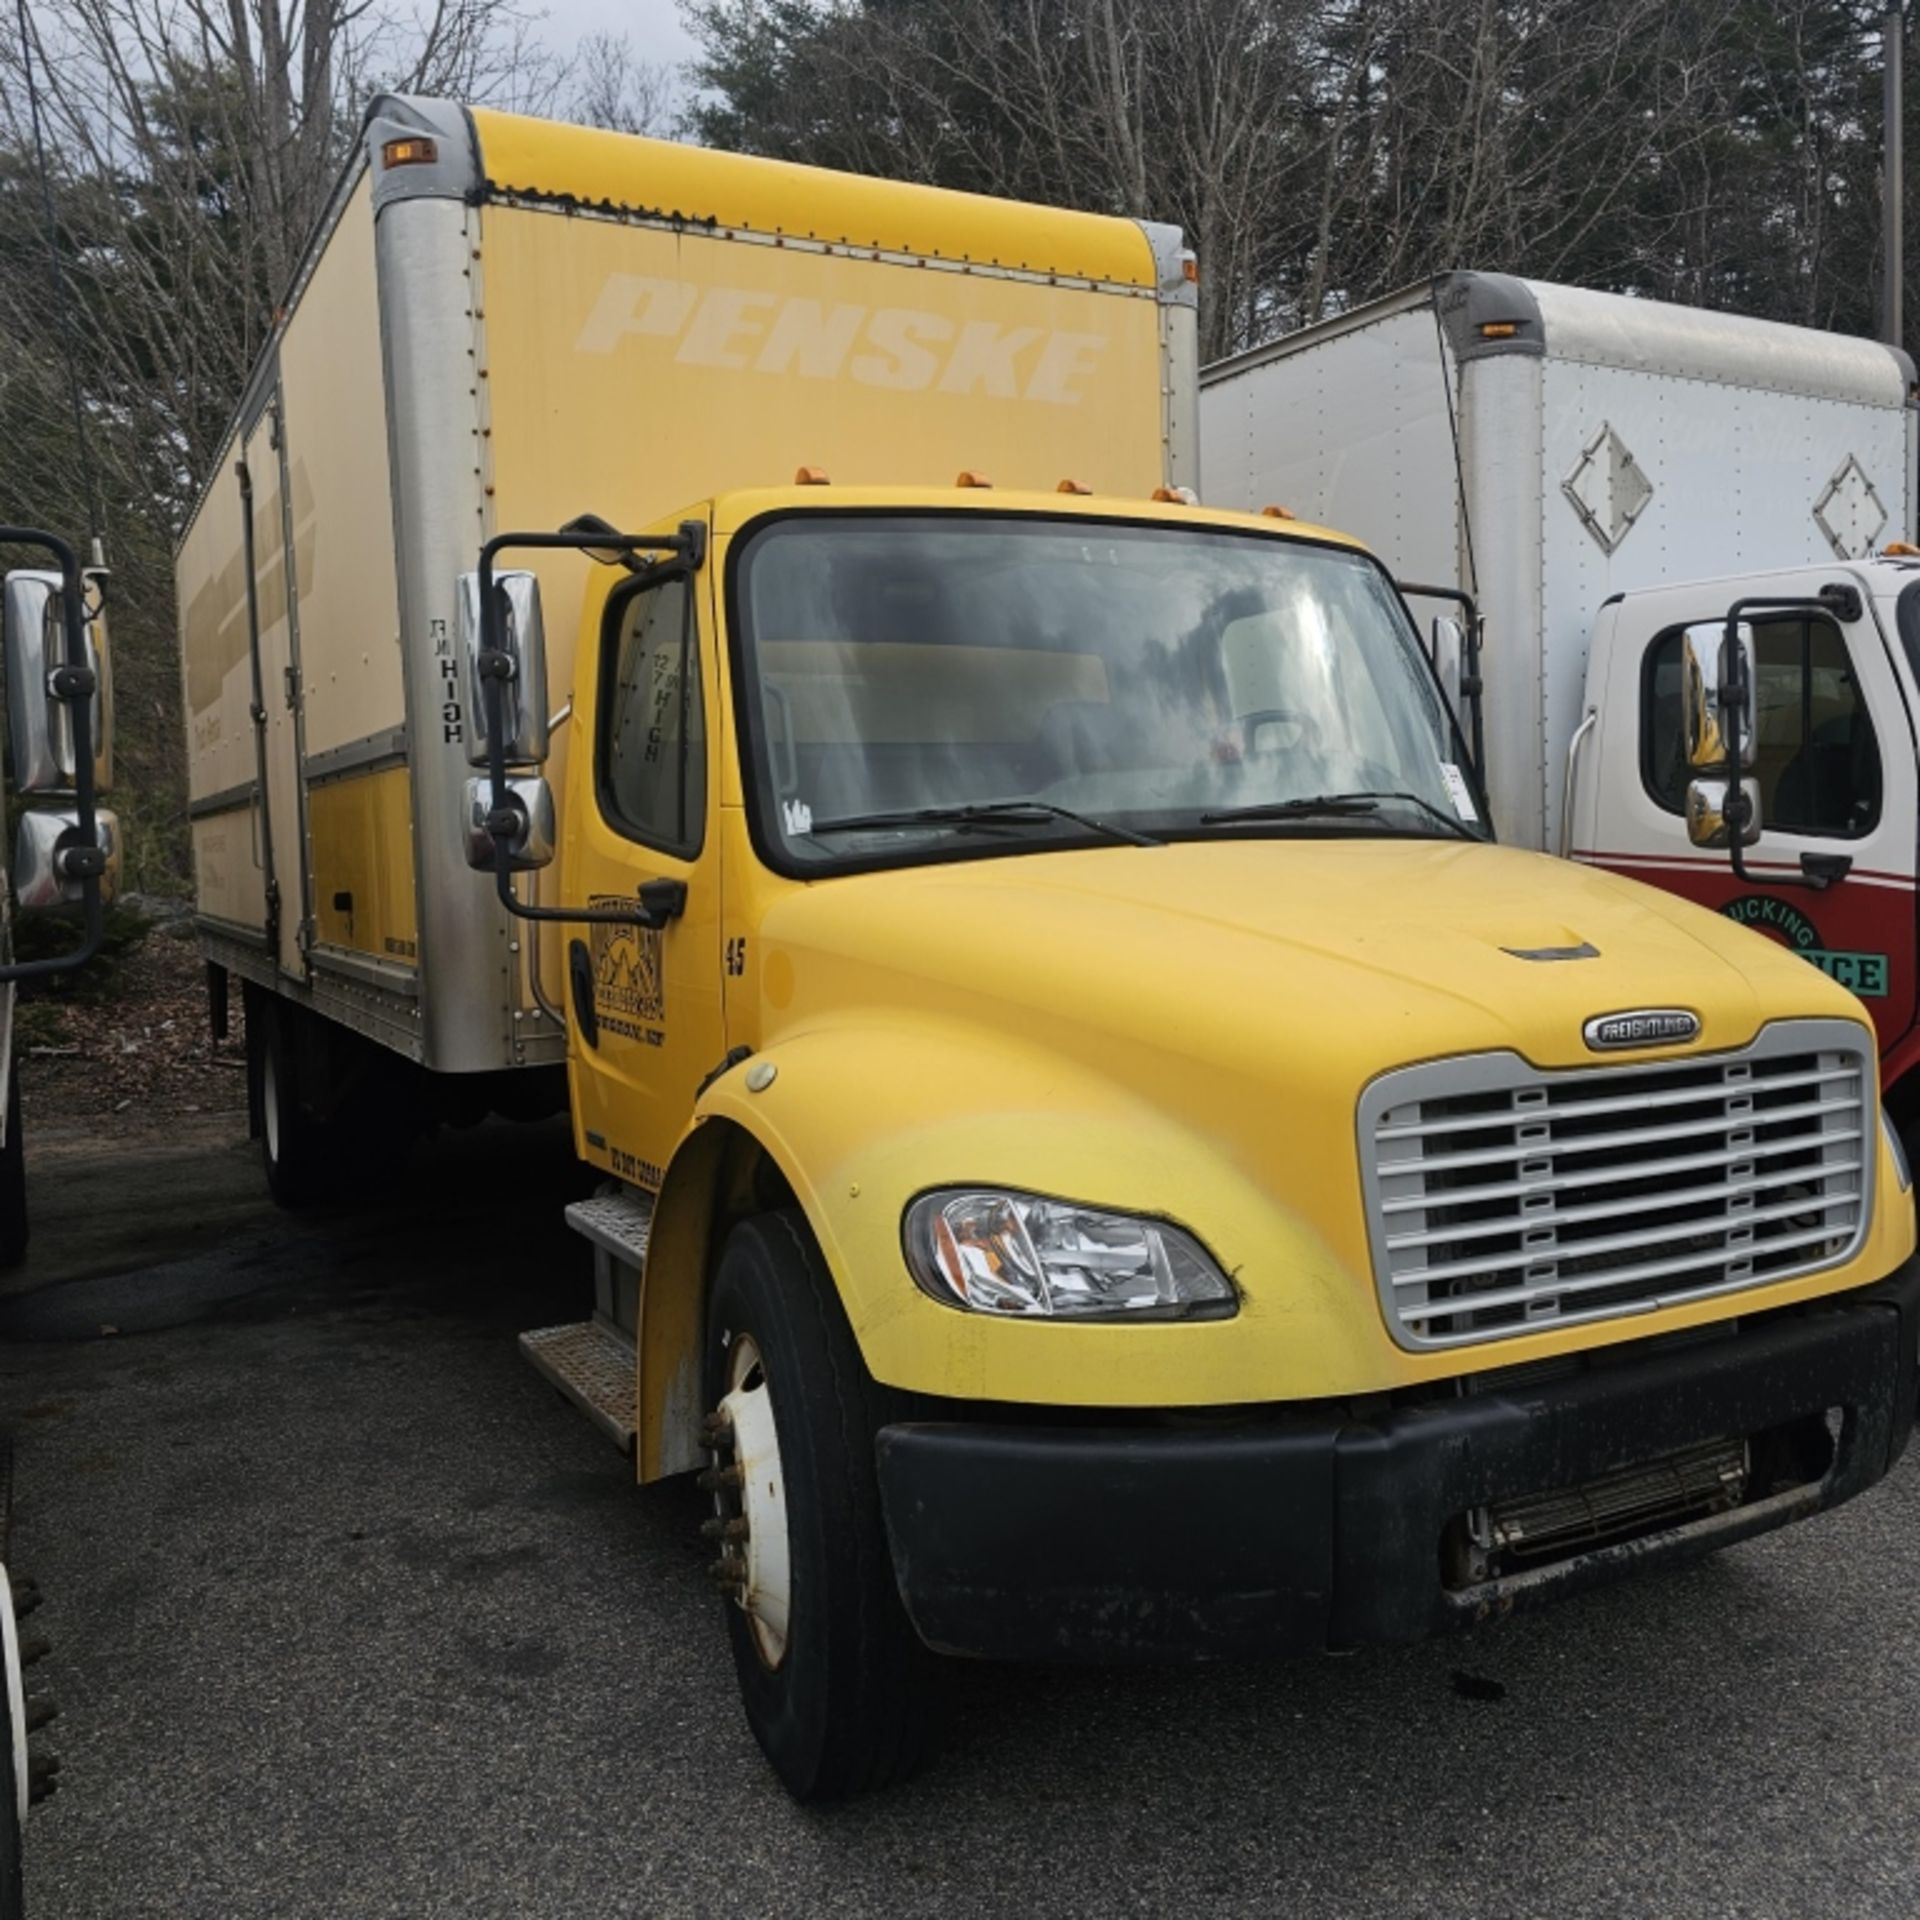 2005 Freightliner Box Truck - Image 3 of 10